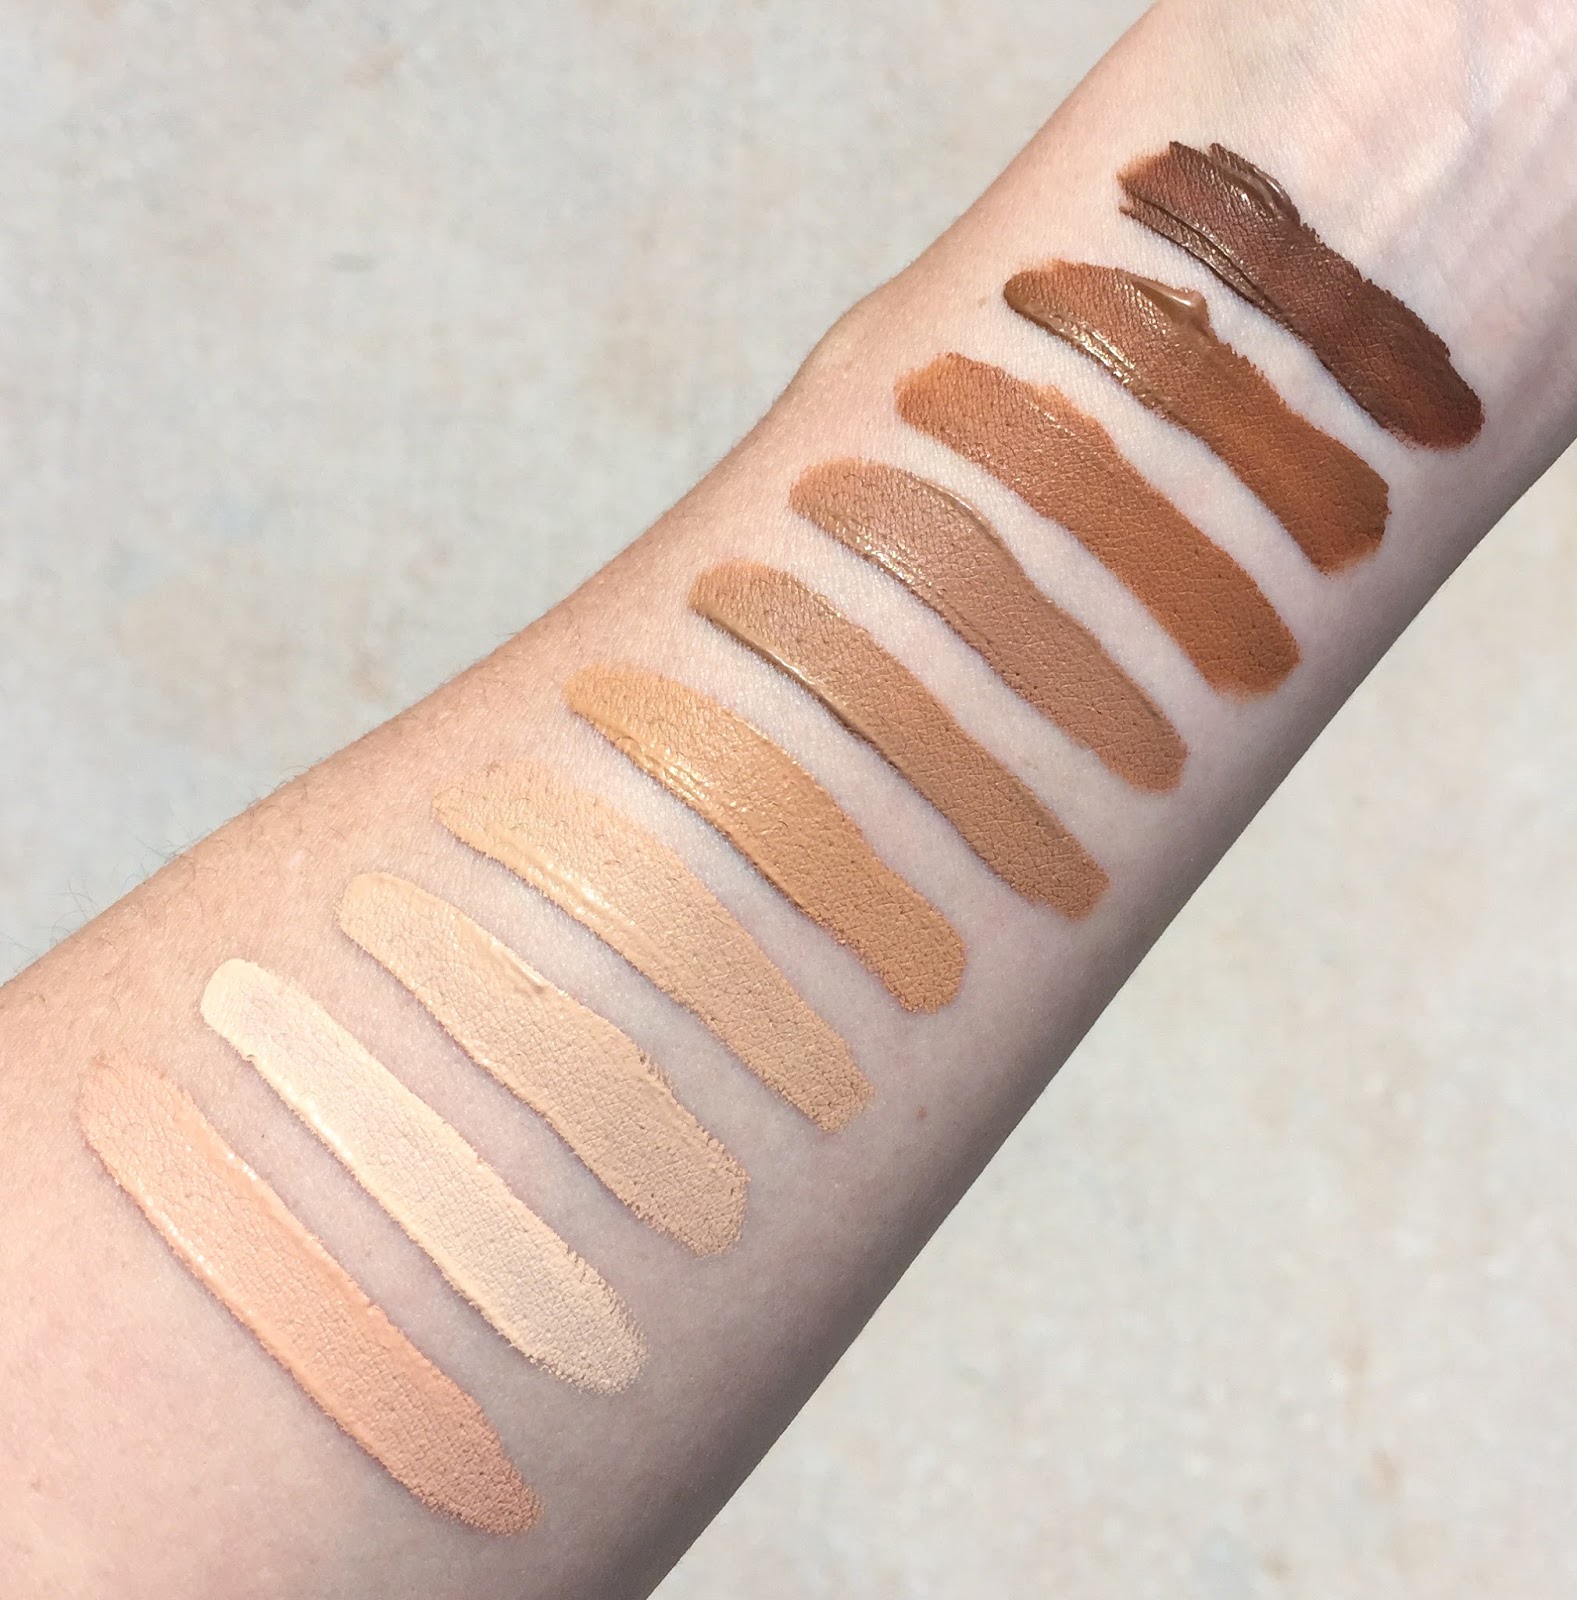 Review of the Kevyn Aucoin Etherealist Super Natural Concealers with swatches of all shades.